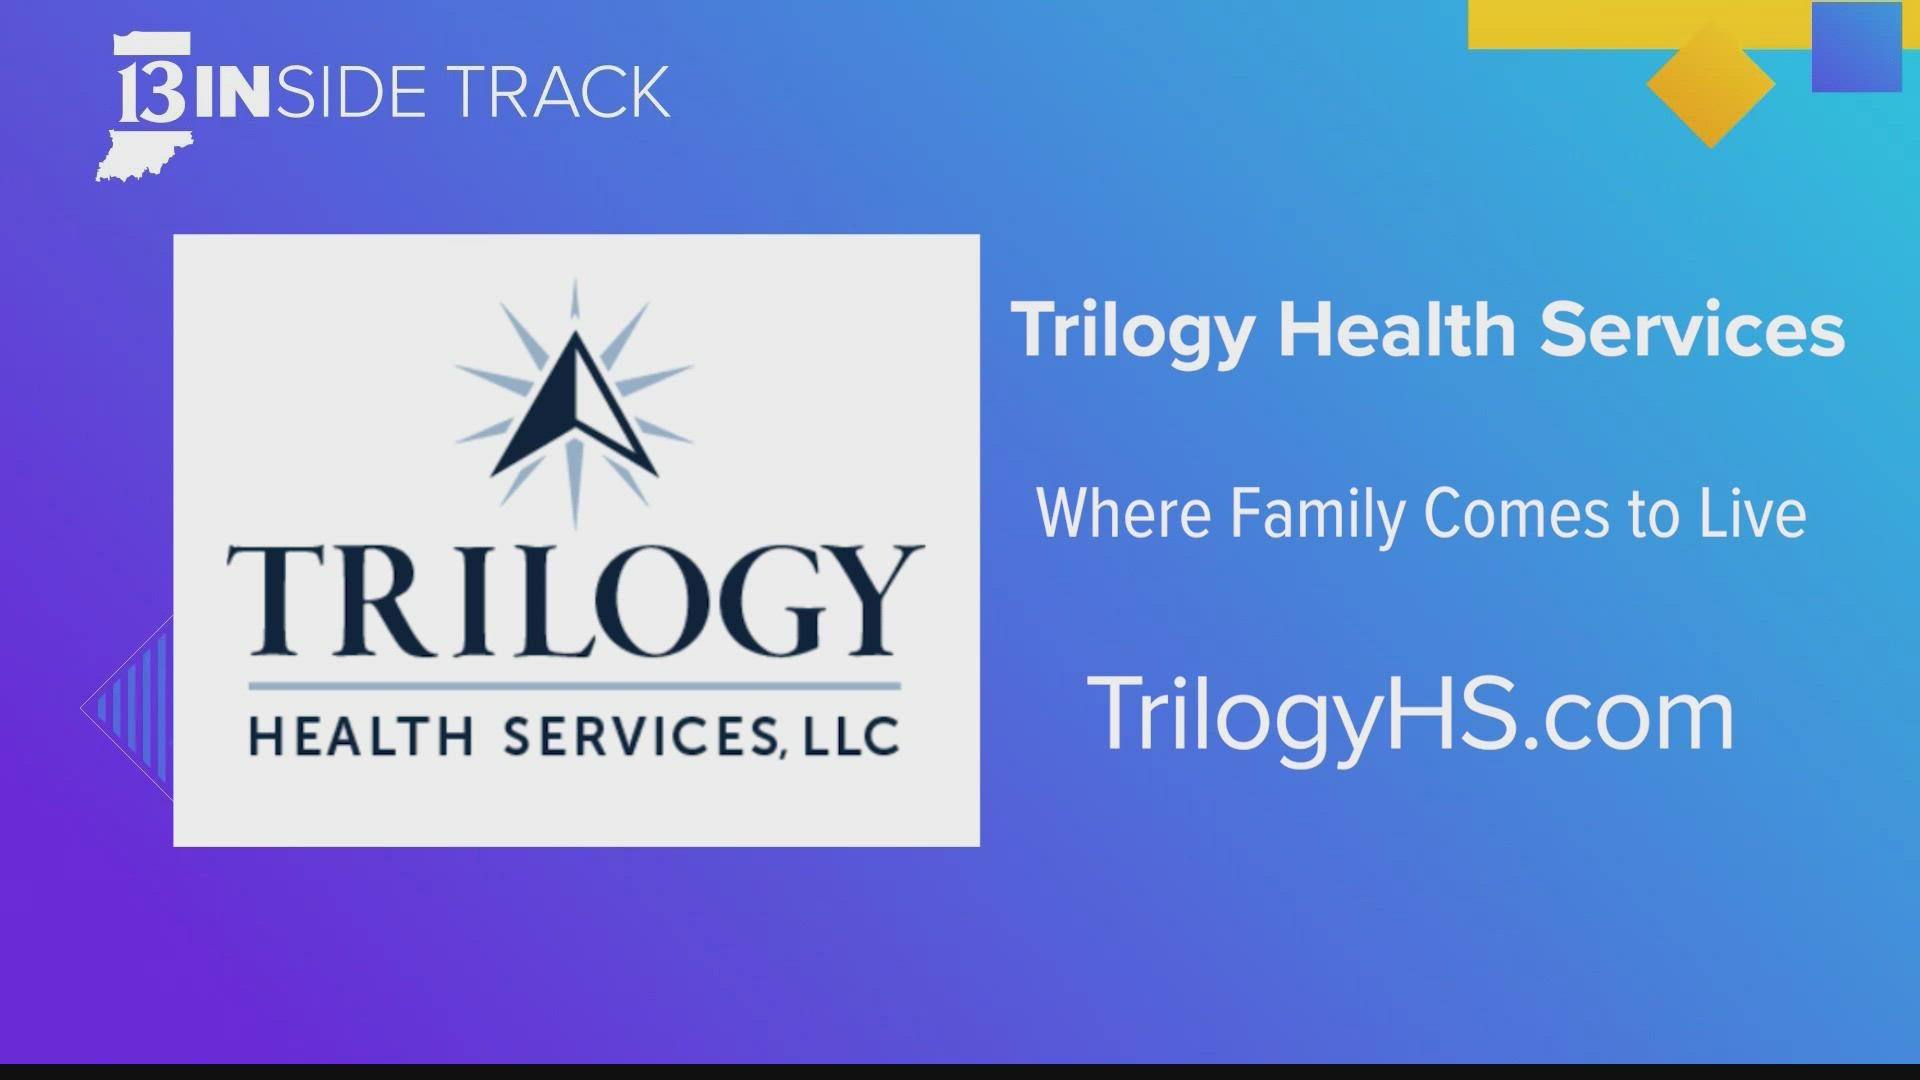 Trilogy Health Services provides assisted living, skilled nursing and rehabilitation, outpatient therapy services, and long-term care.